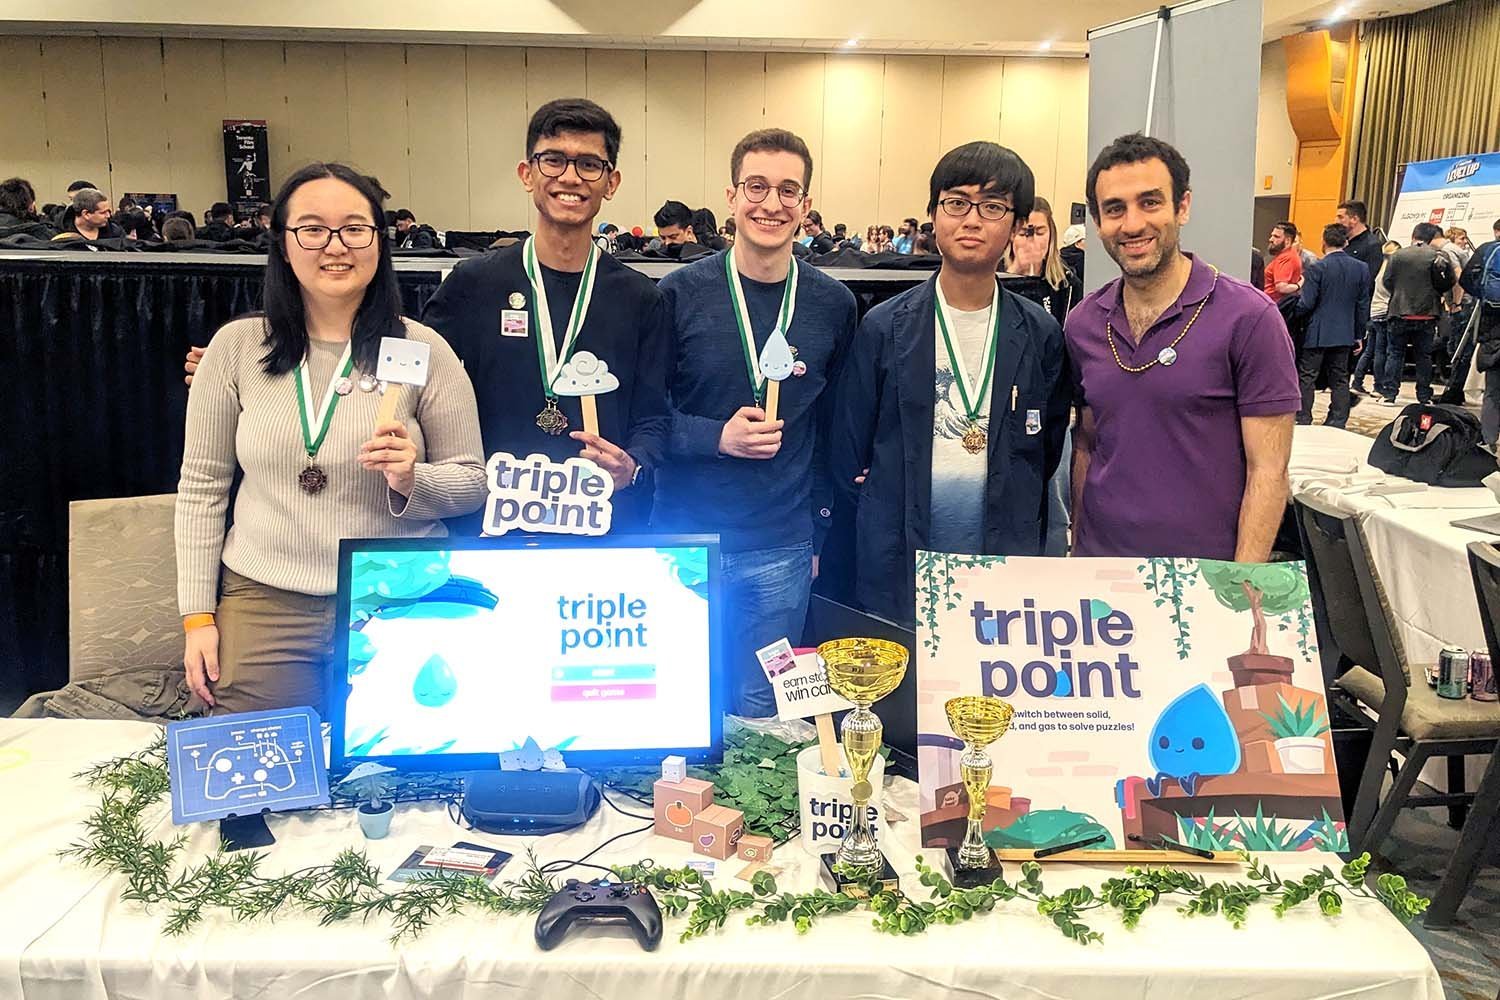 University of Toronto computer science students Chrisee Zhu, Fenil Patel, Ethan Moran and Elliot Chen with instructor Elias Adum at the Level Up Showcase on April 19, 2023.